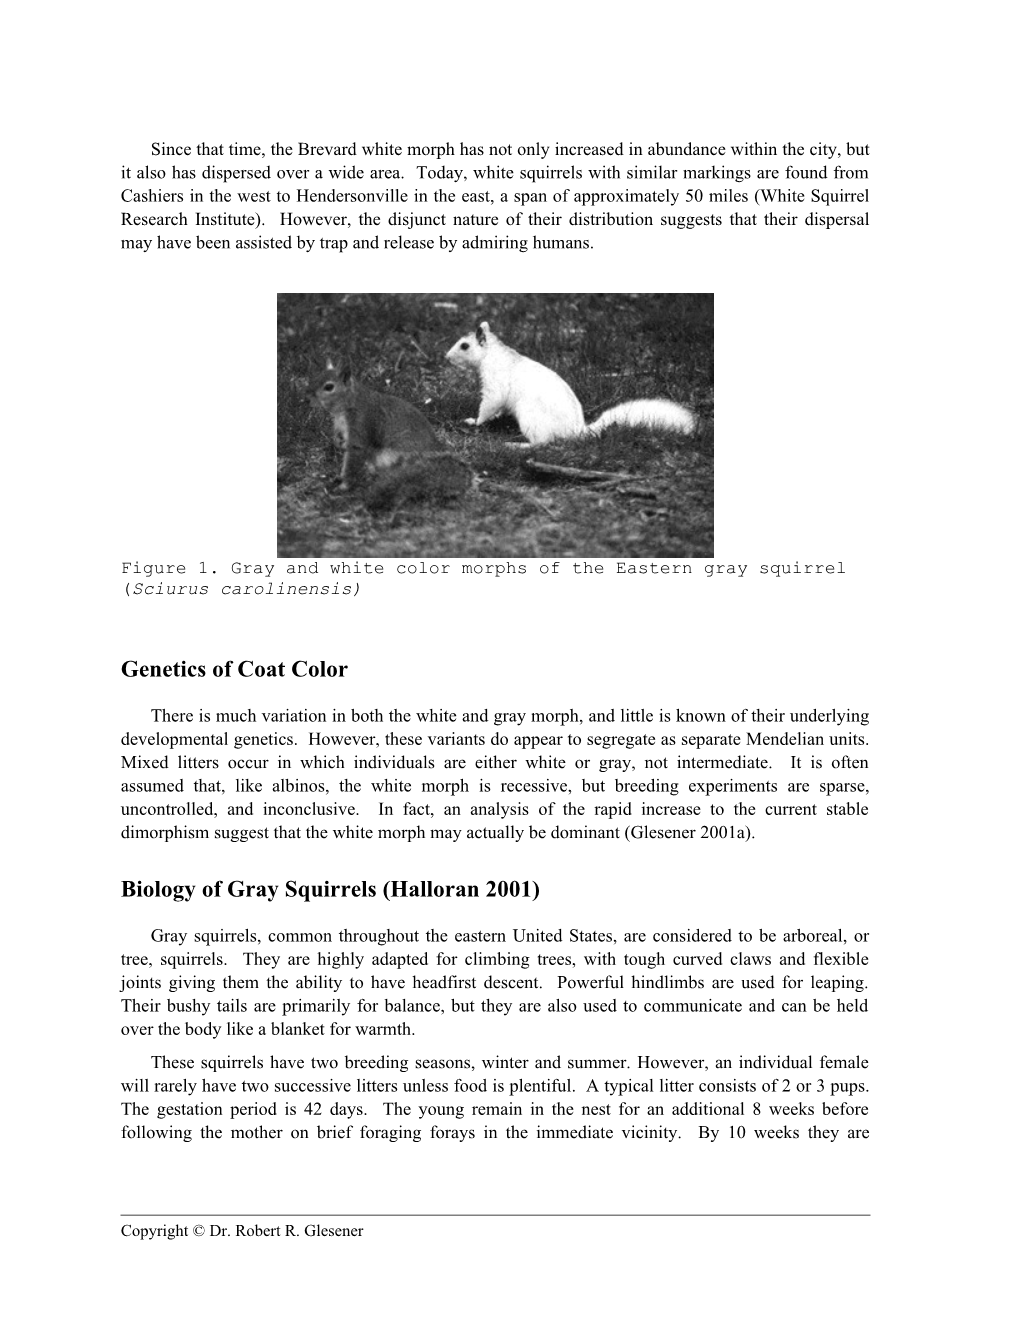 To Monitor the Distribution and Abundance of Brevard S Resident White Squirrel Population